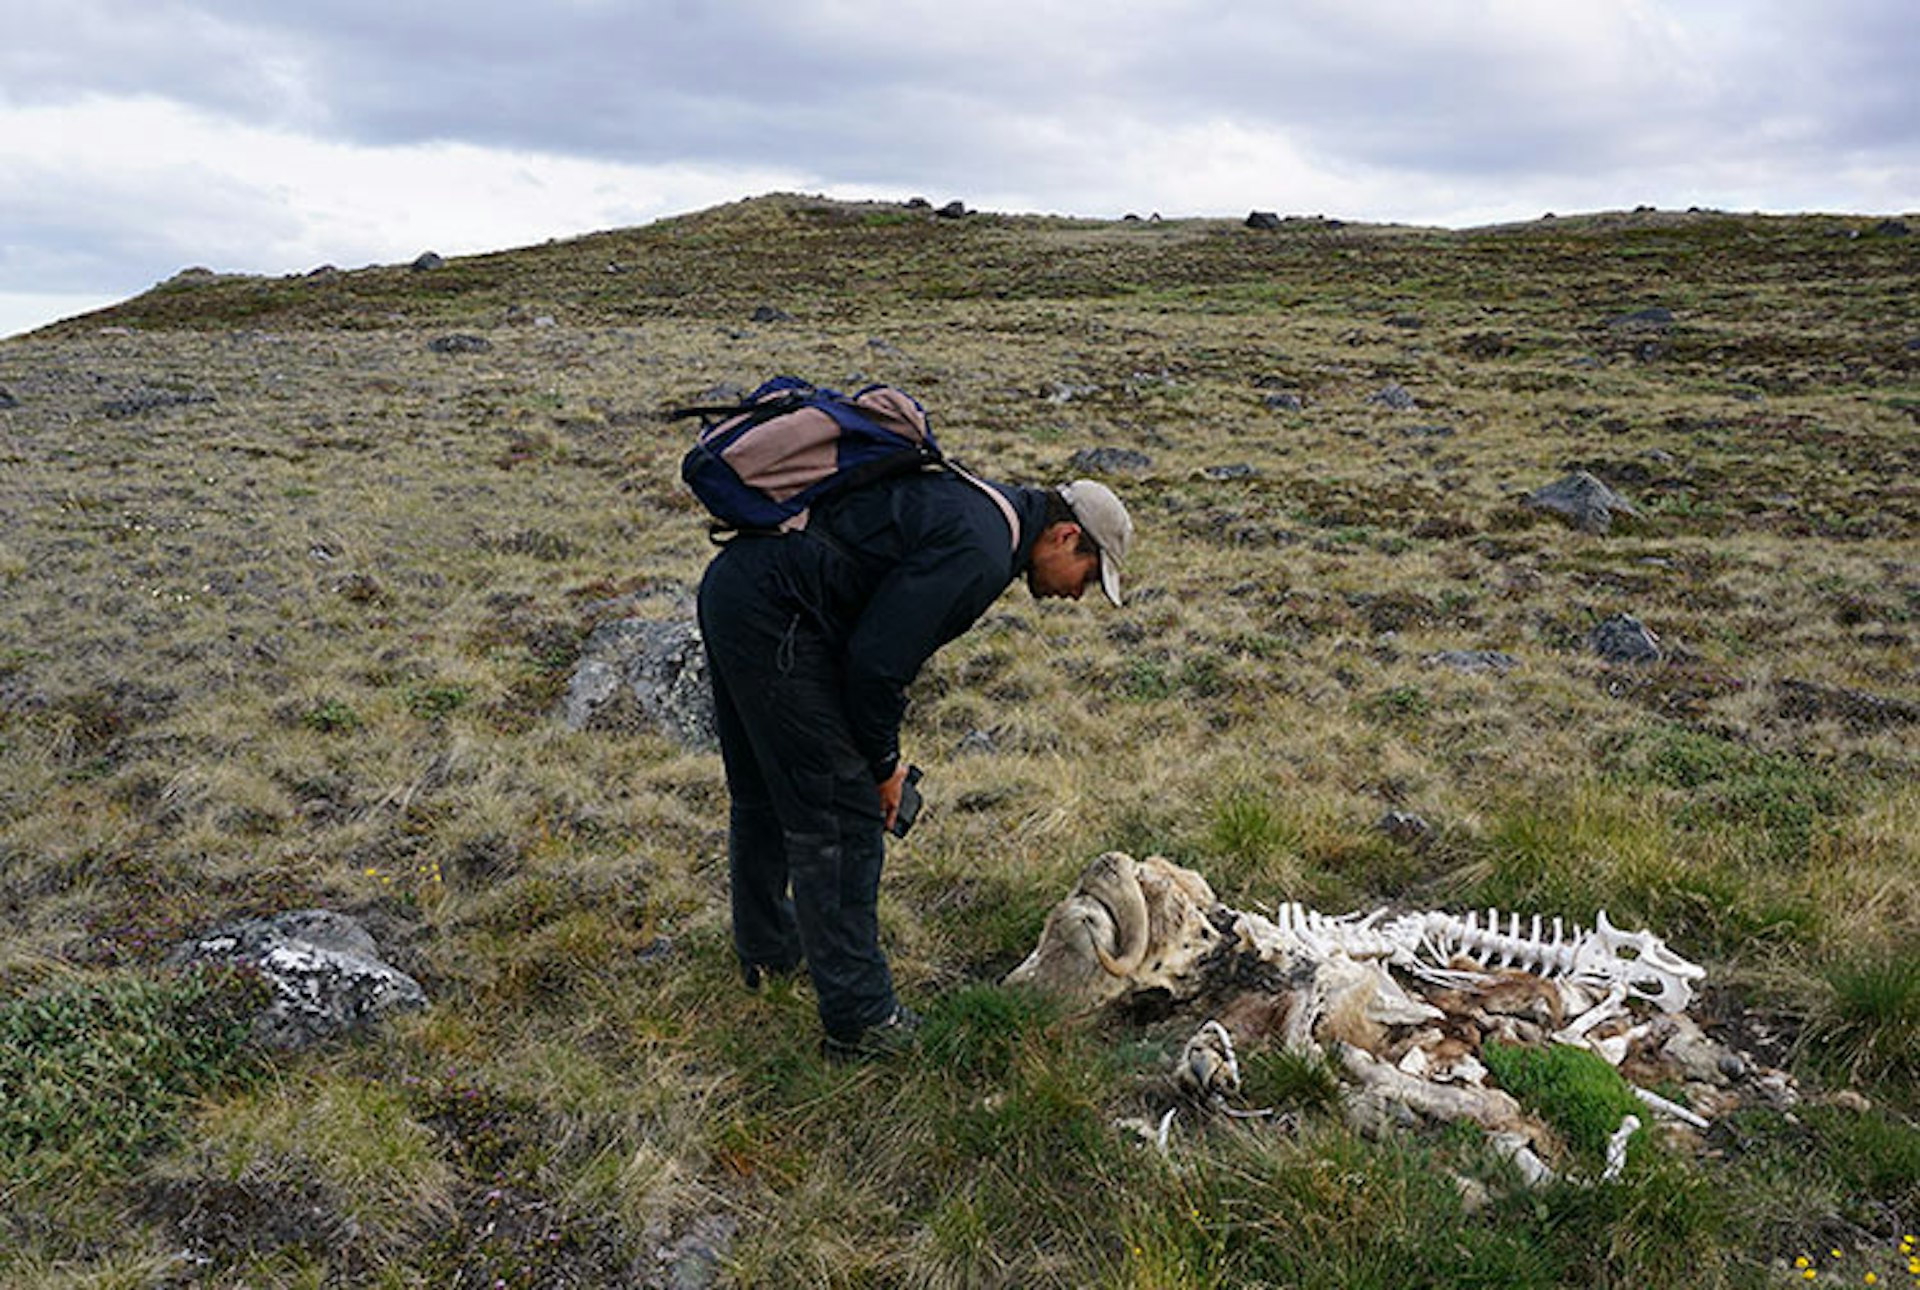 The valleys are dotted with the bones of muskoxen, caribou and other game. Some Greenlanders will collect the horns to carve into jewellery and ornaments. Image by Anita Isalska / Lonely Planet